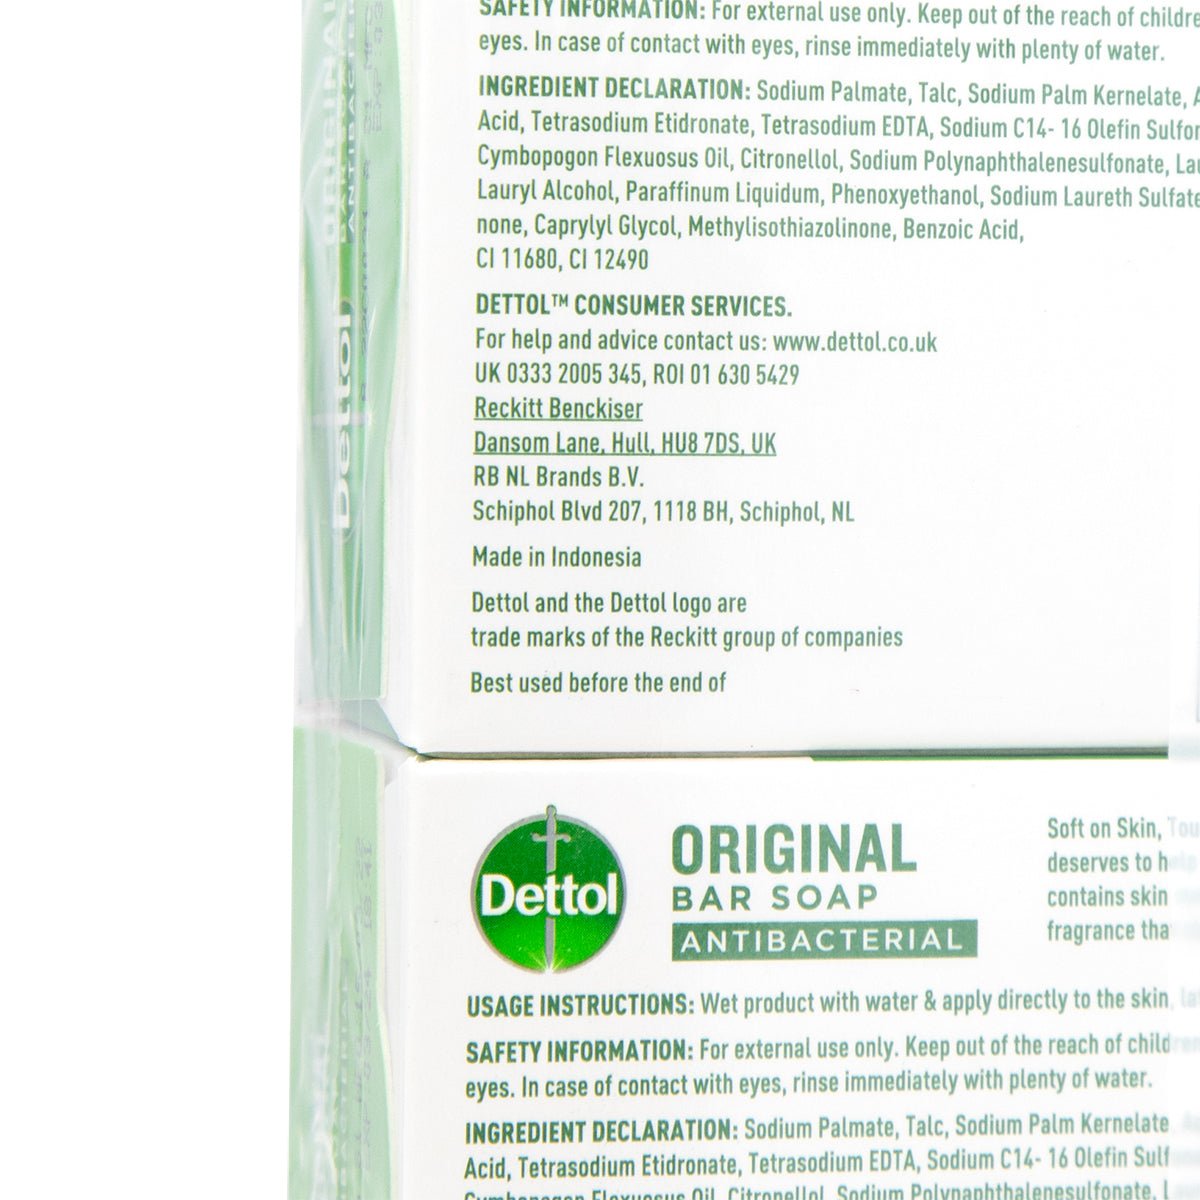 Dettol Anti-Bacterial Bar Soap Twin Pack - Intamarque 5011417554876